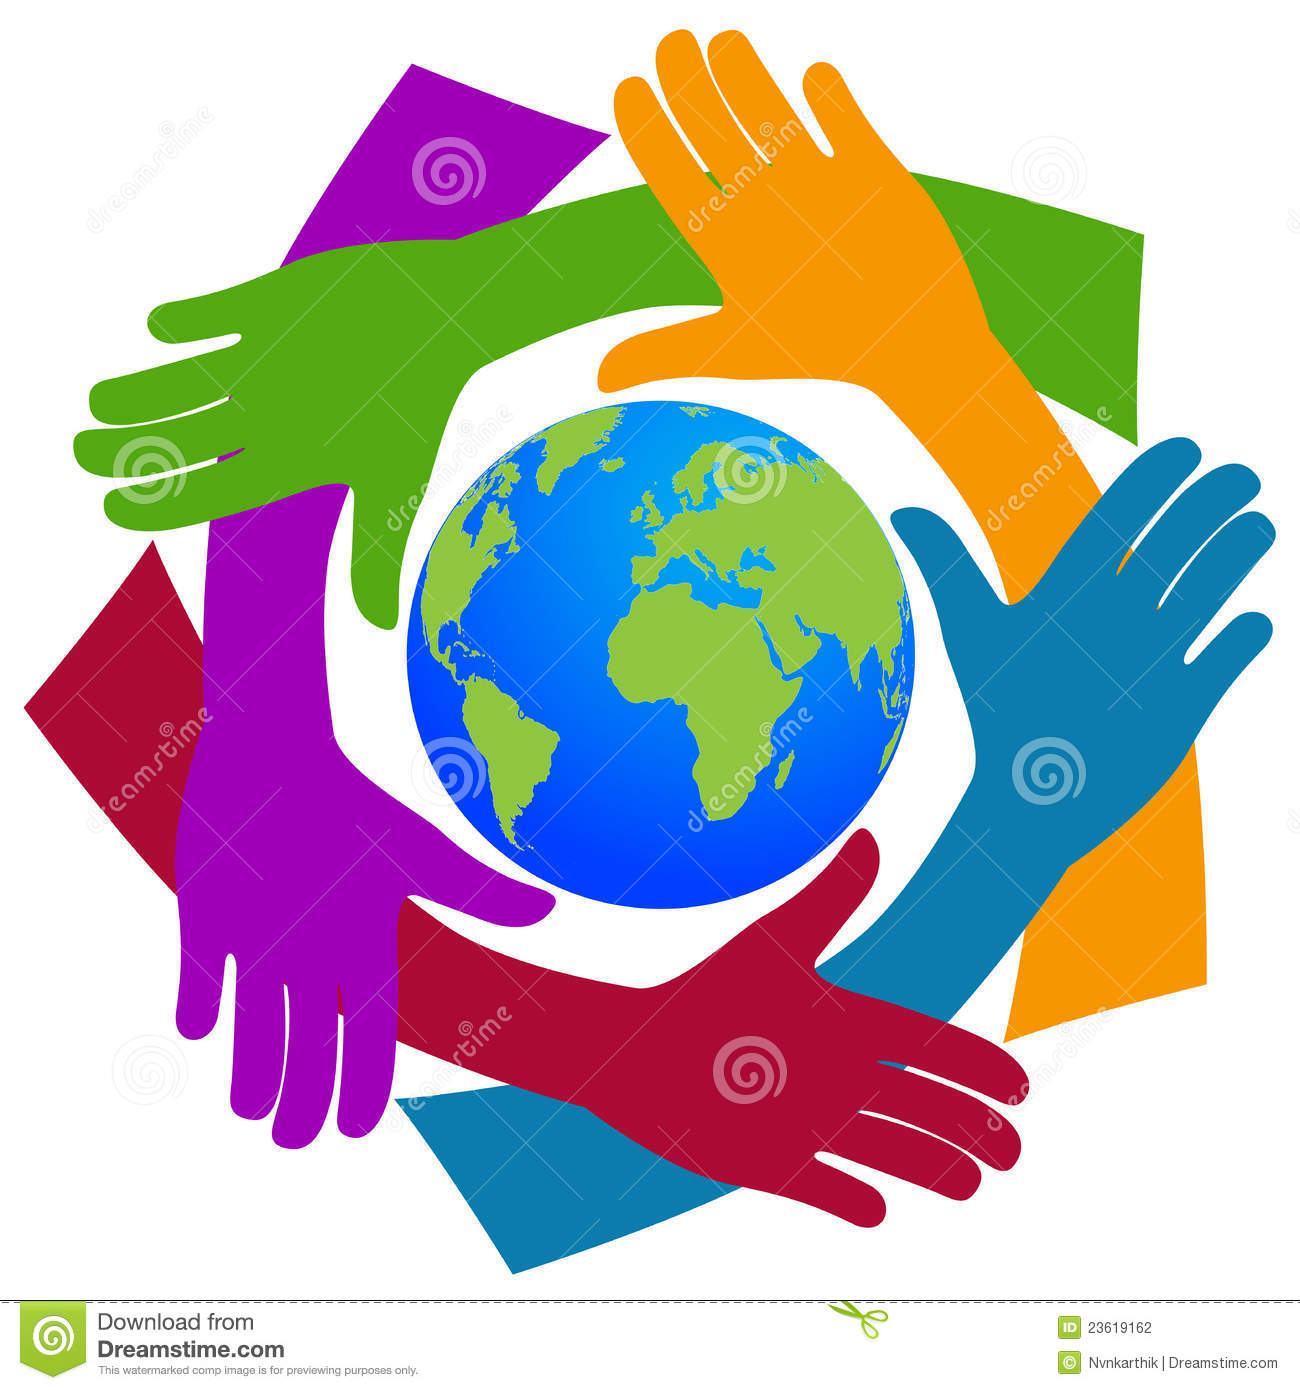 Illustration Of Hands Around The World Design Isolated On White